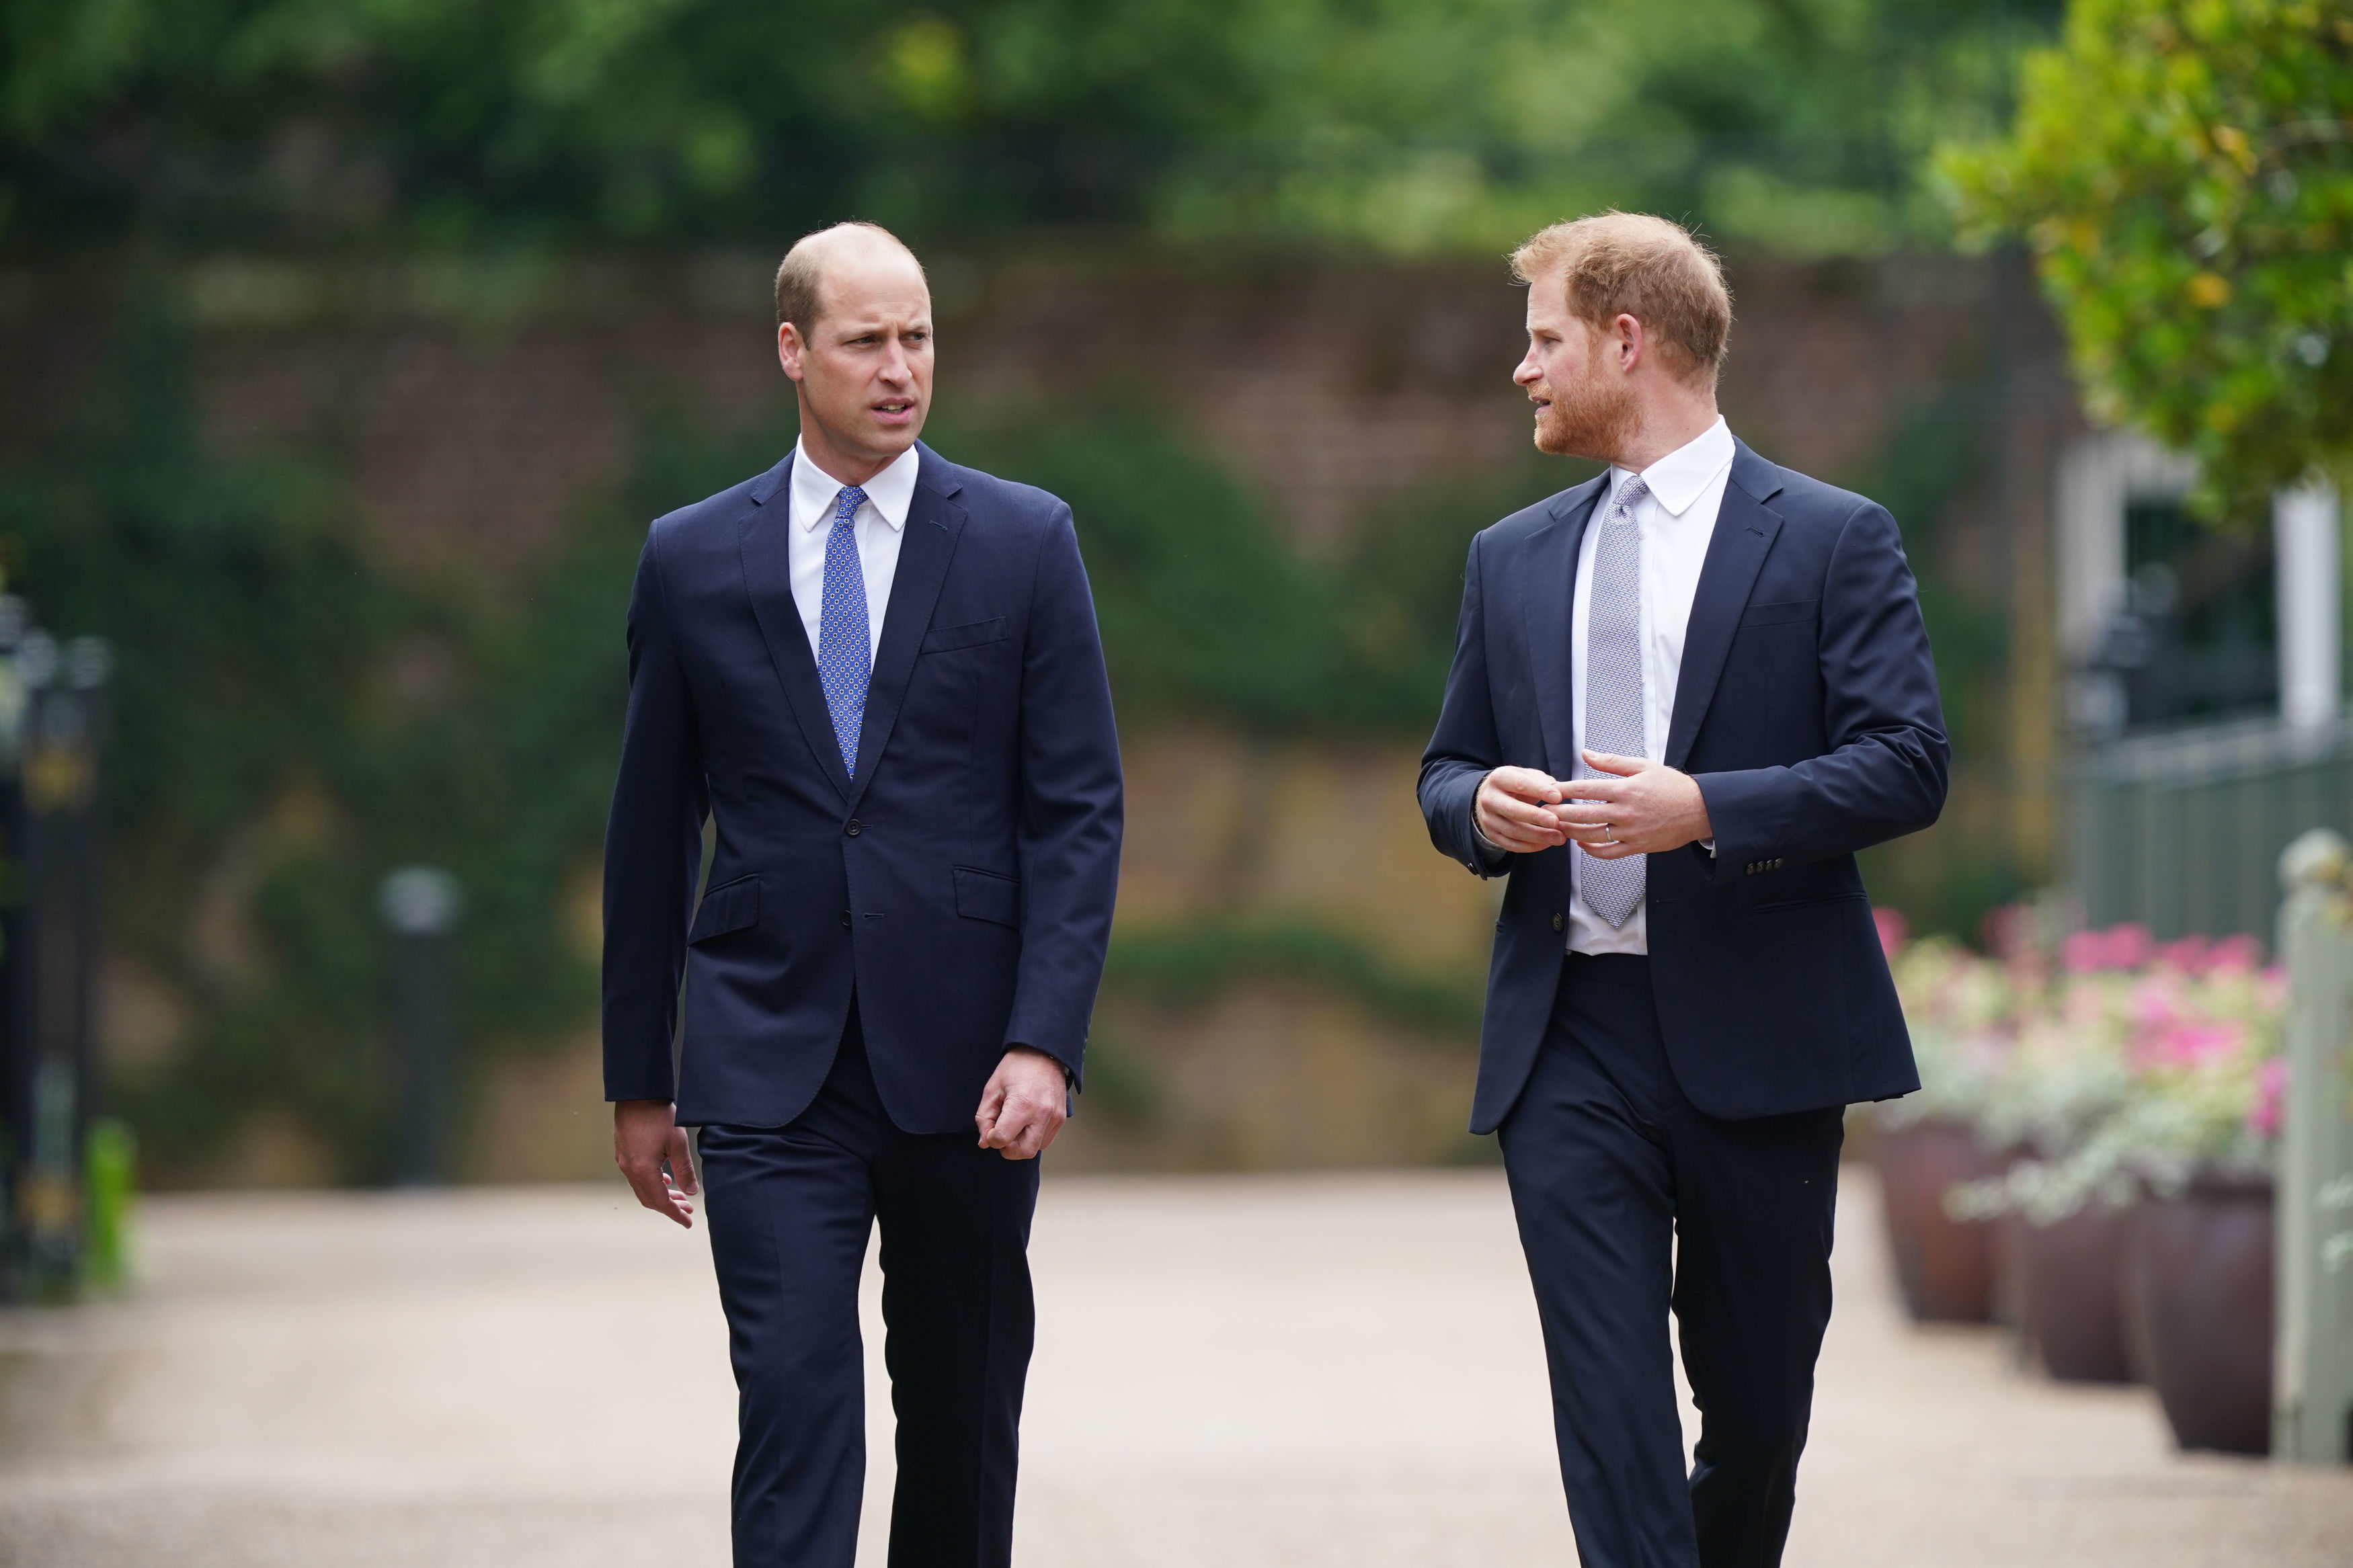 Prince William and Prince Harry arrive for the unveiling of Princess Diana's statue at Kensington Palace